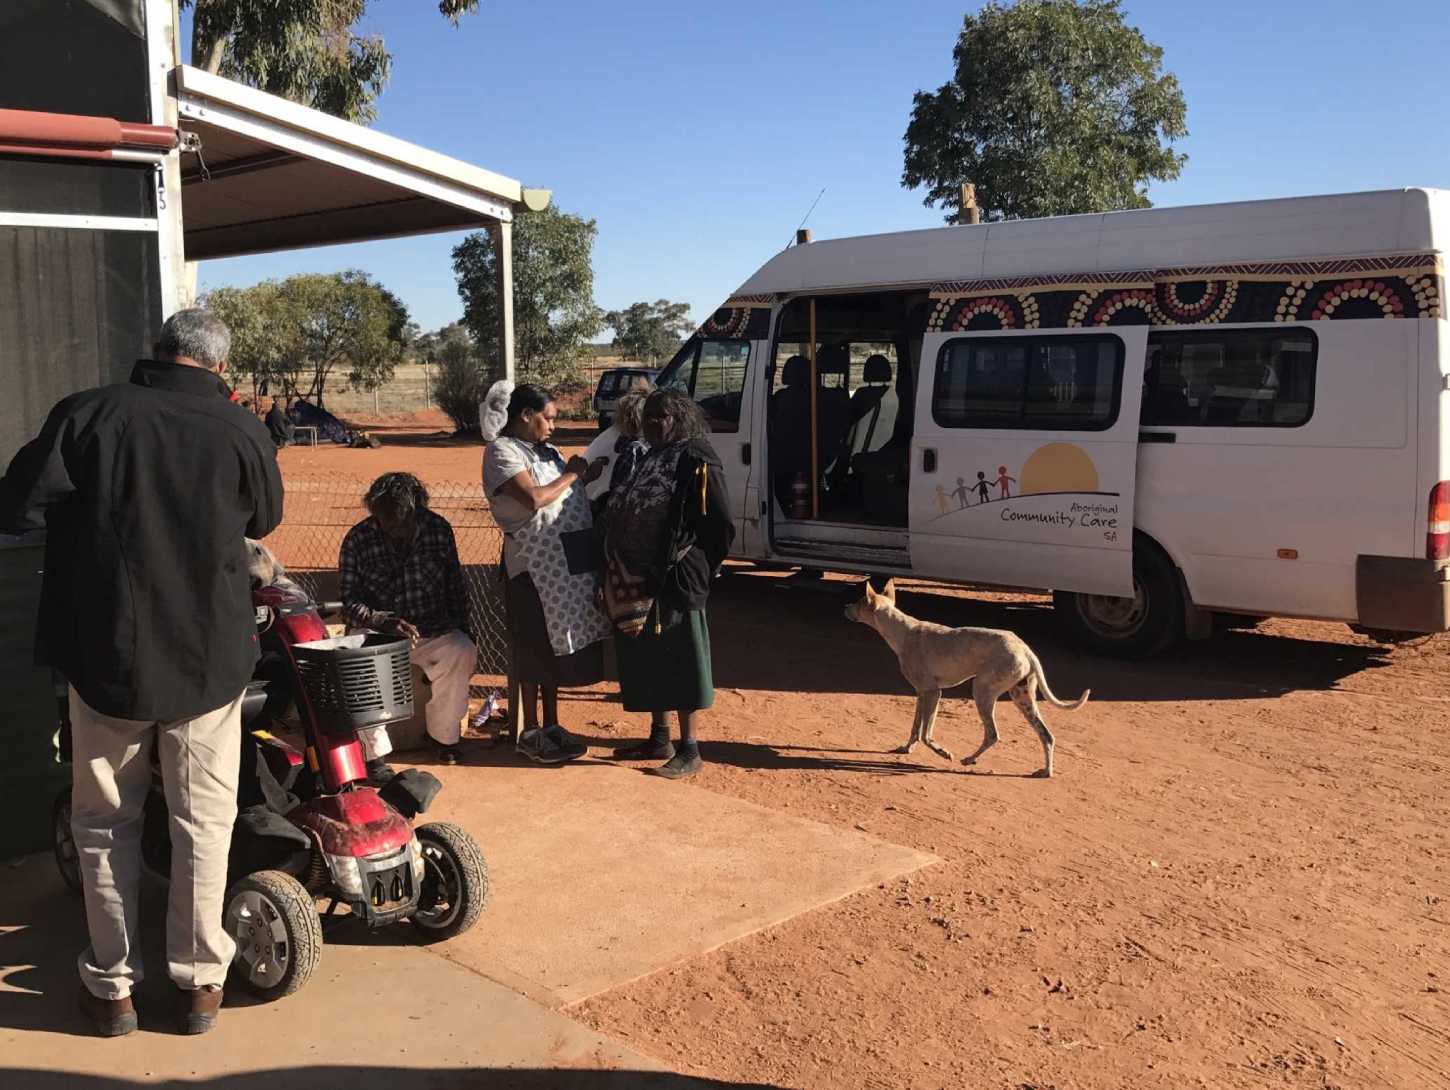 Aboriginal Elders standing next to a residence in APY Lands area and receiving supplies from the ACS van transport